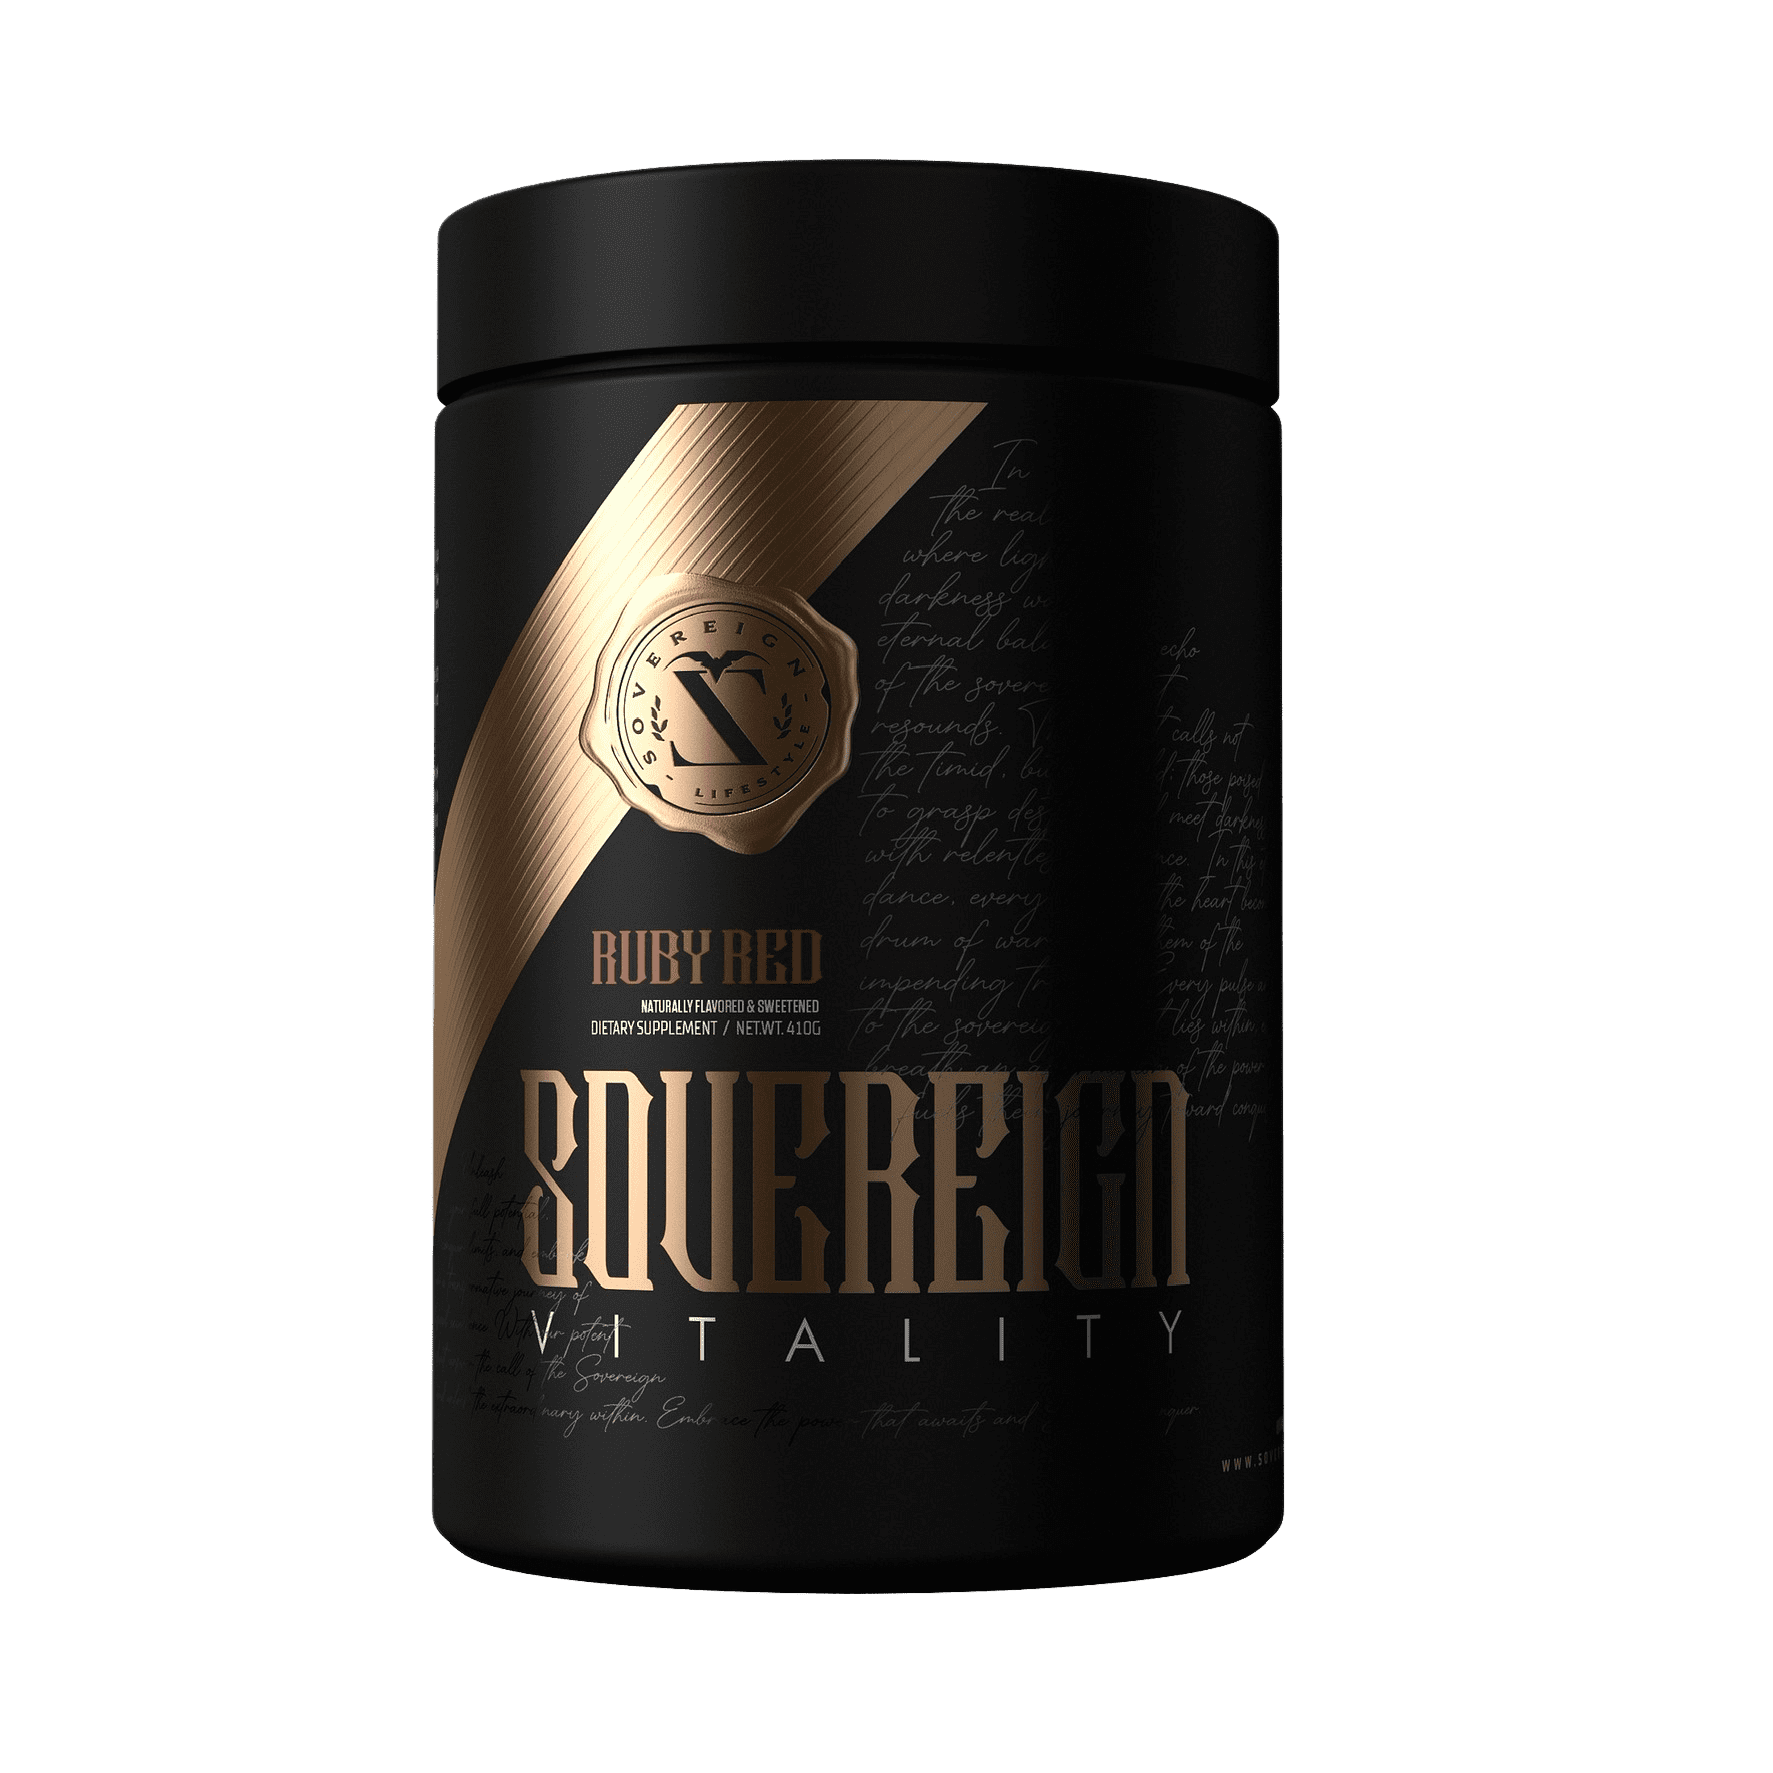 Worlds best pre workout Sovereign Lifestyle Vitality Natural Pre Workout powder